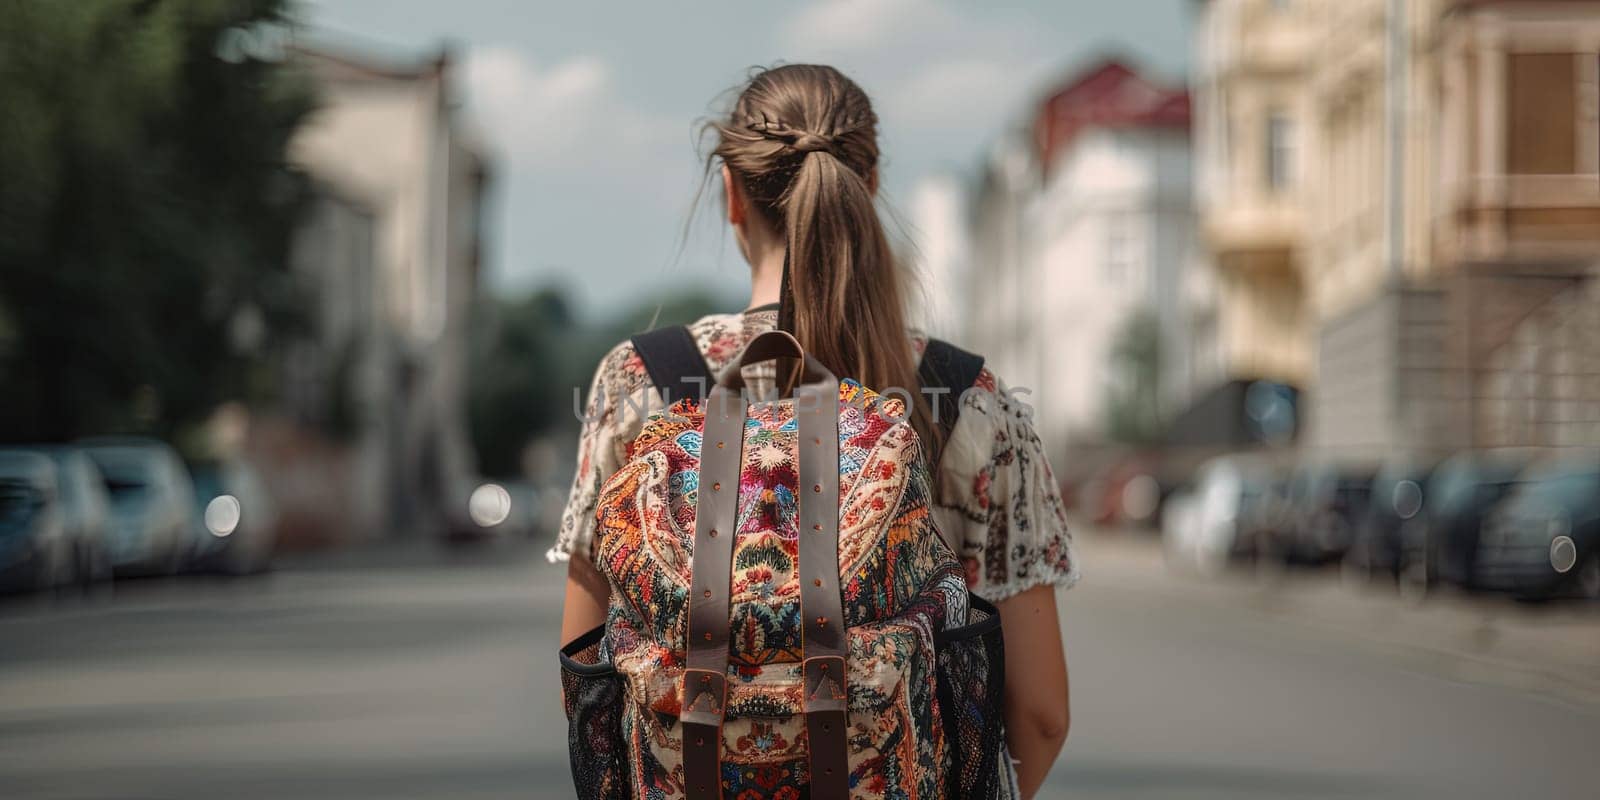 Young Girl With Stylish Backpack With A Embroidery On A Street by tan4ikk1